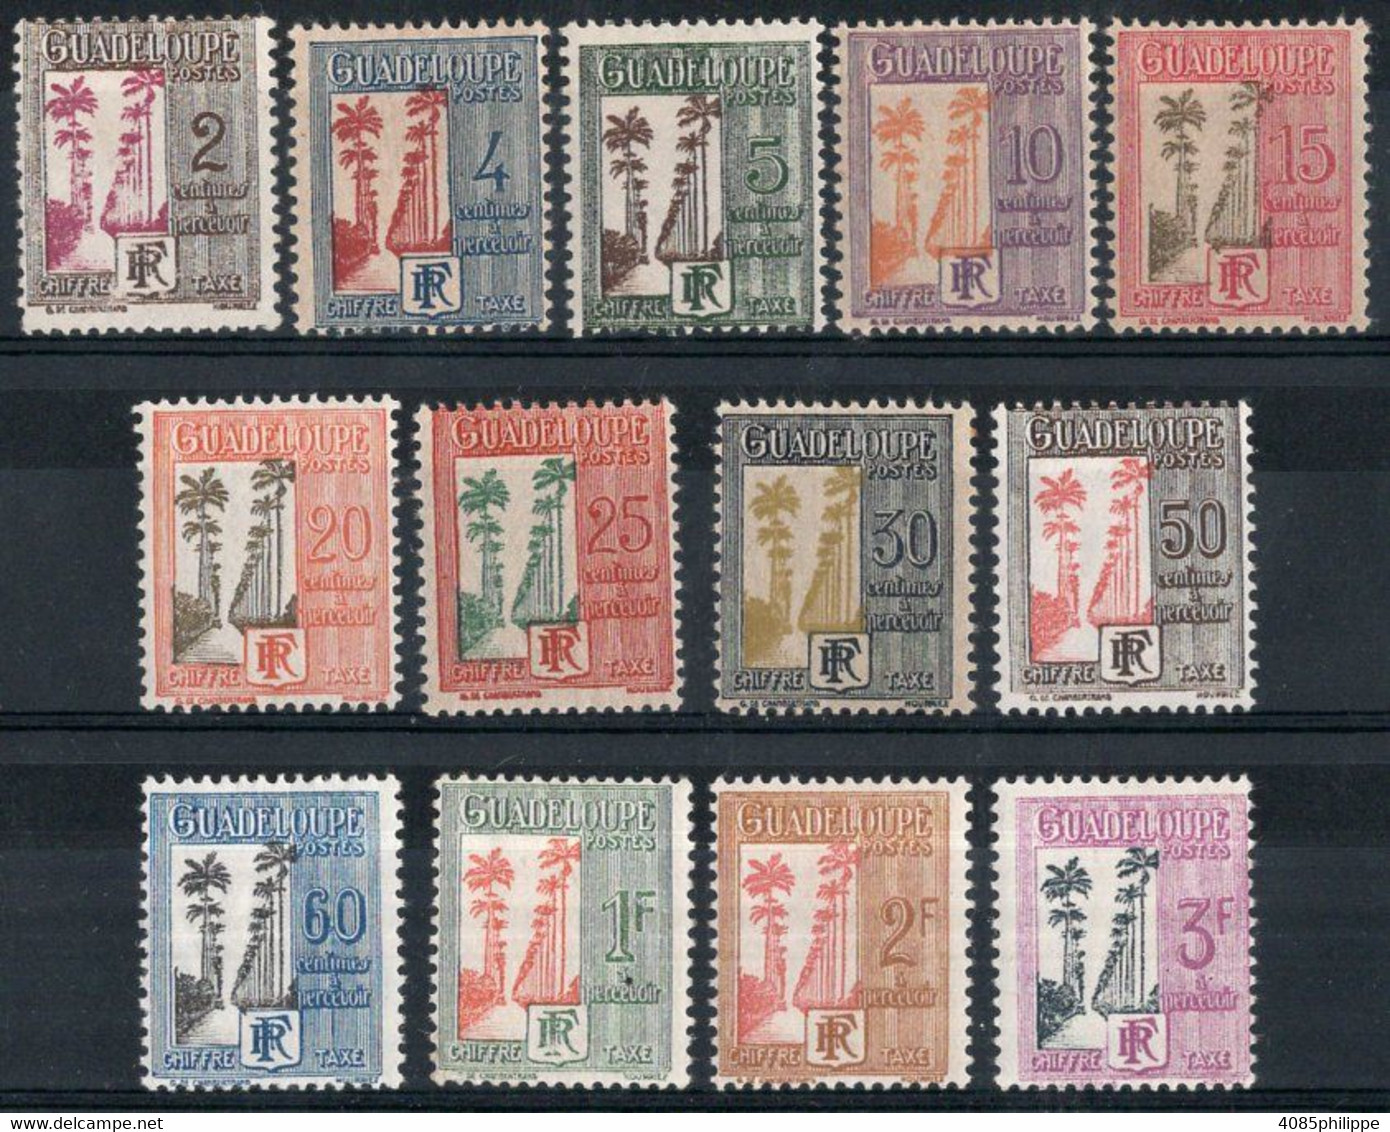 Guadeloupe Timbres-Taxe N°25* à 37*  Neufs Charnières TB Cote 15€00 - Impuestos